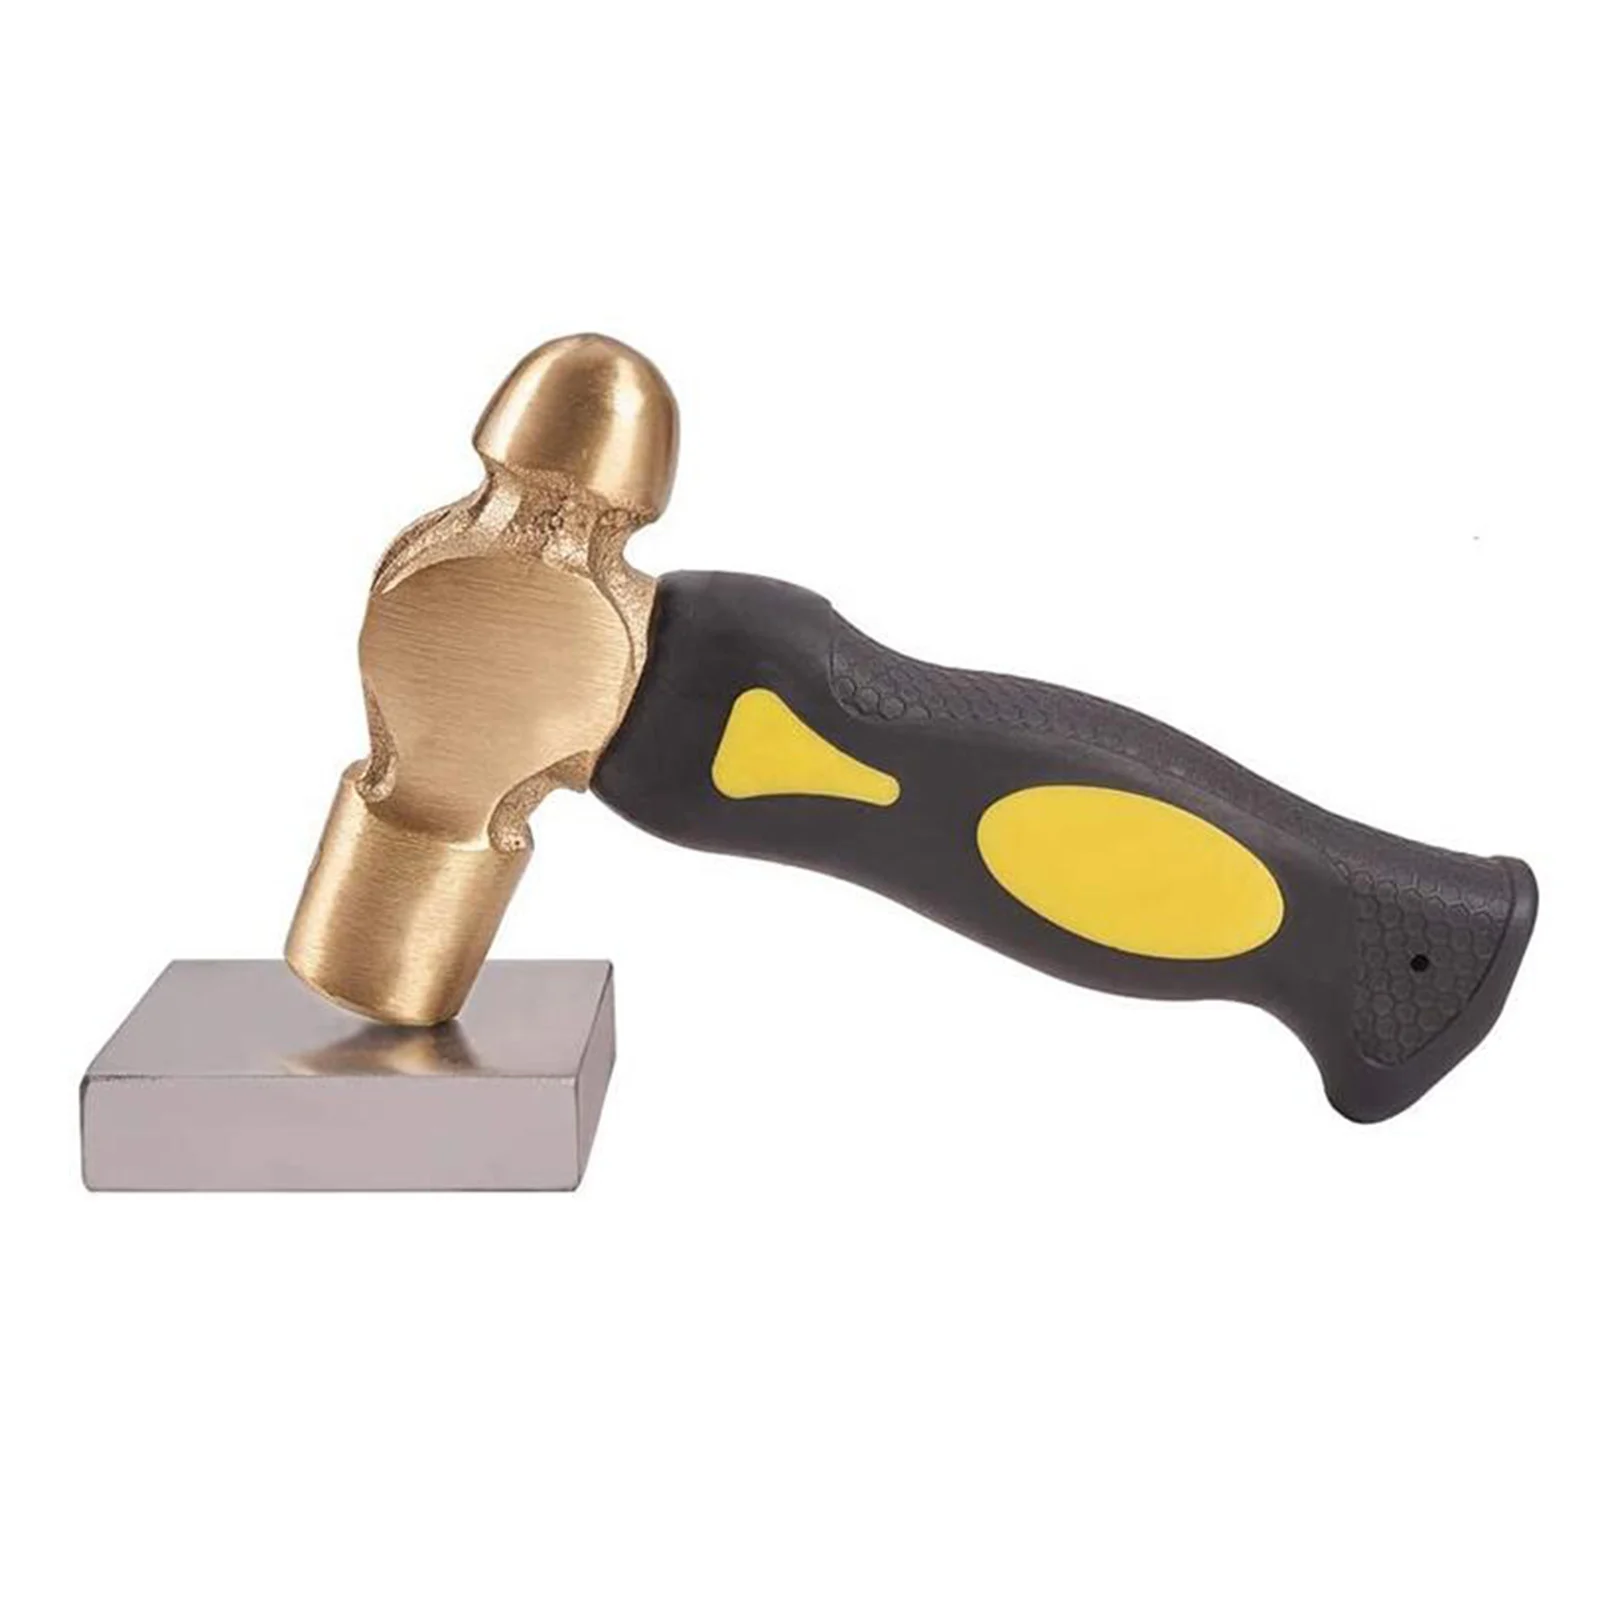 1lb Brass Stamp Hammer with Flat Mallet Head Short Handle Design Comfortable Grip Chasing Hammer for crafts Arts Supplies Accs